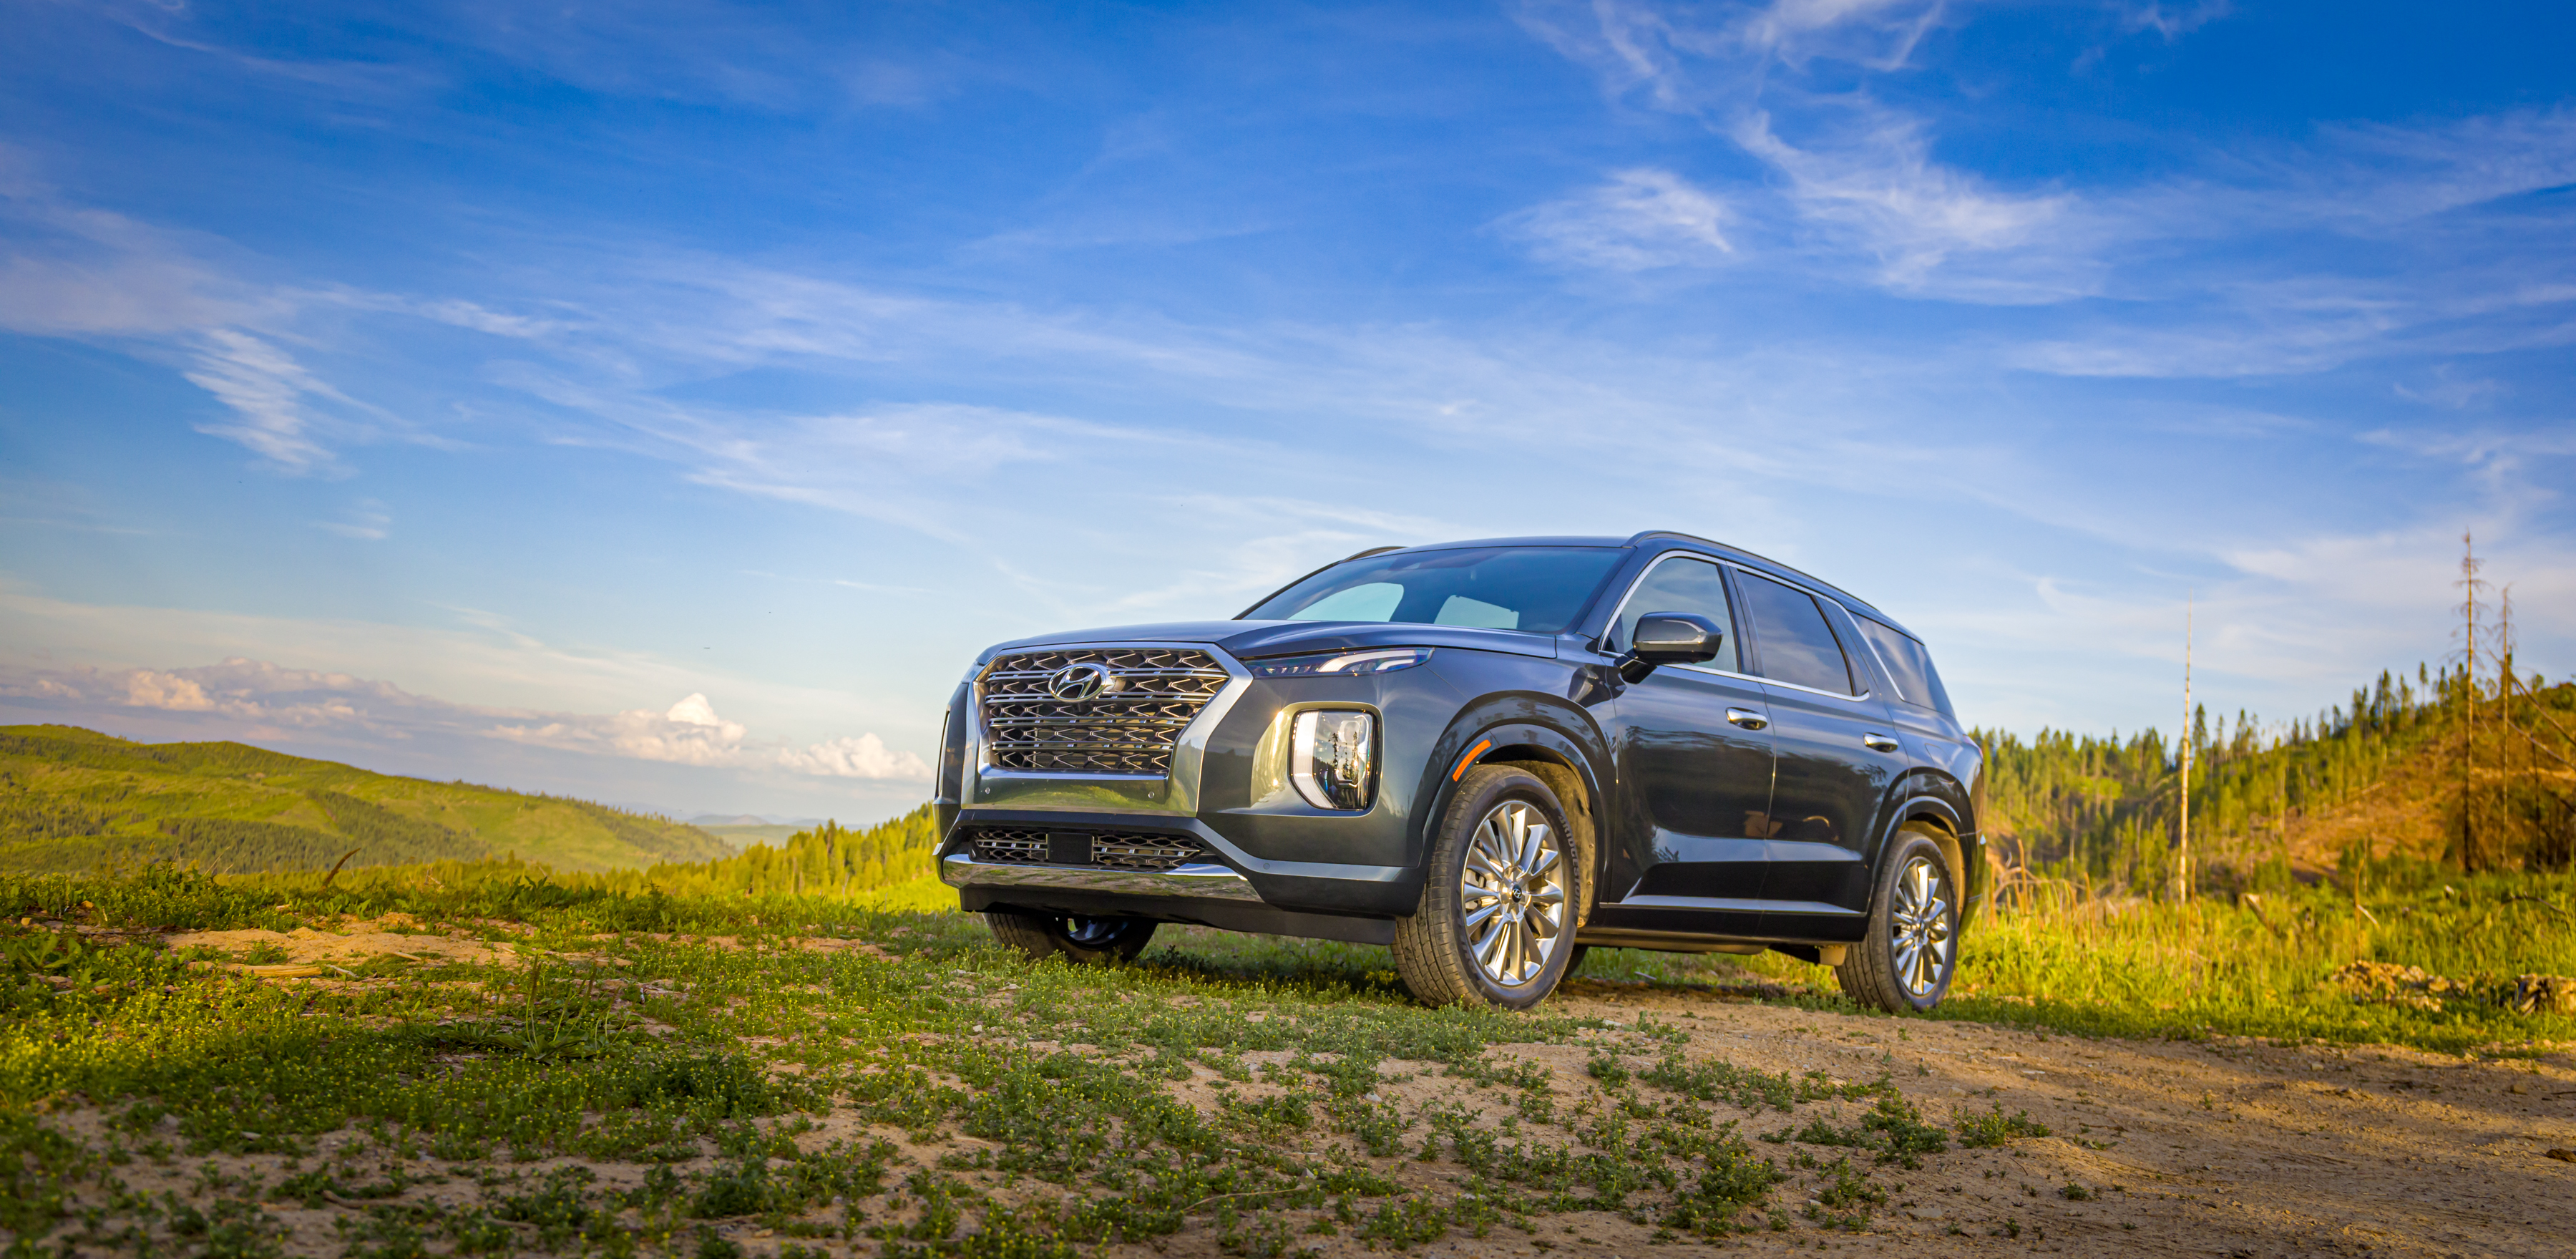 A Hyundai Palisade SUV parked on a grassy hill in the wilderness